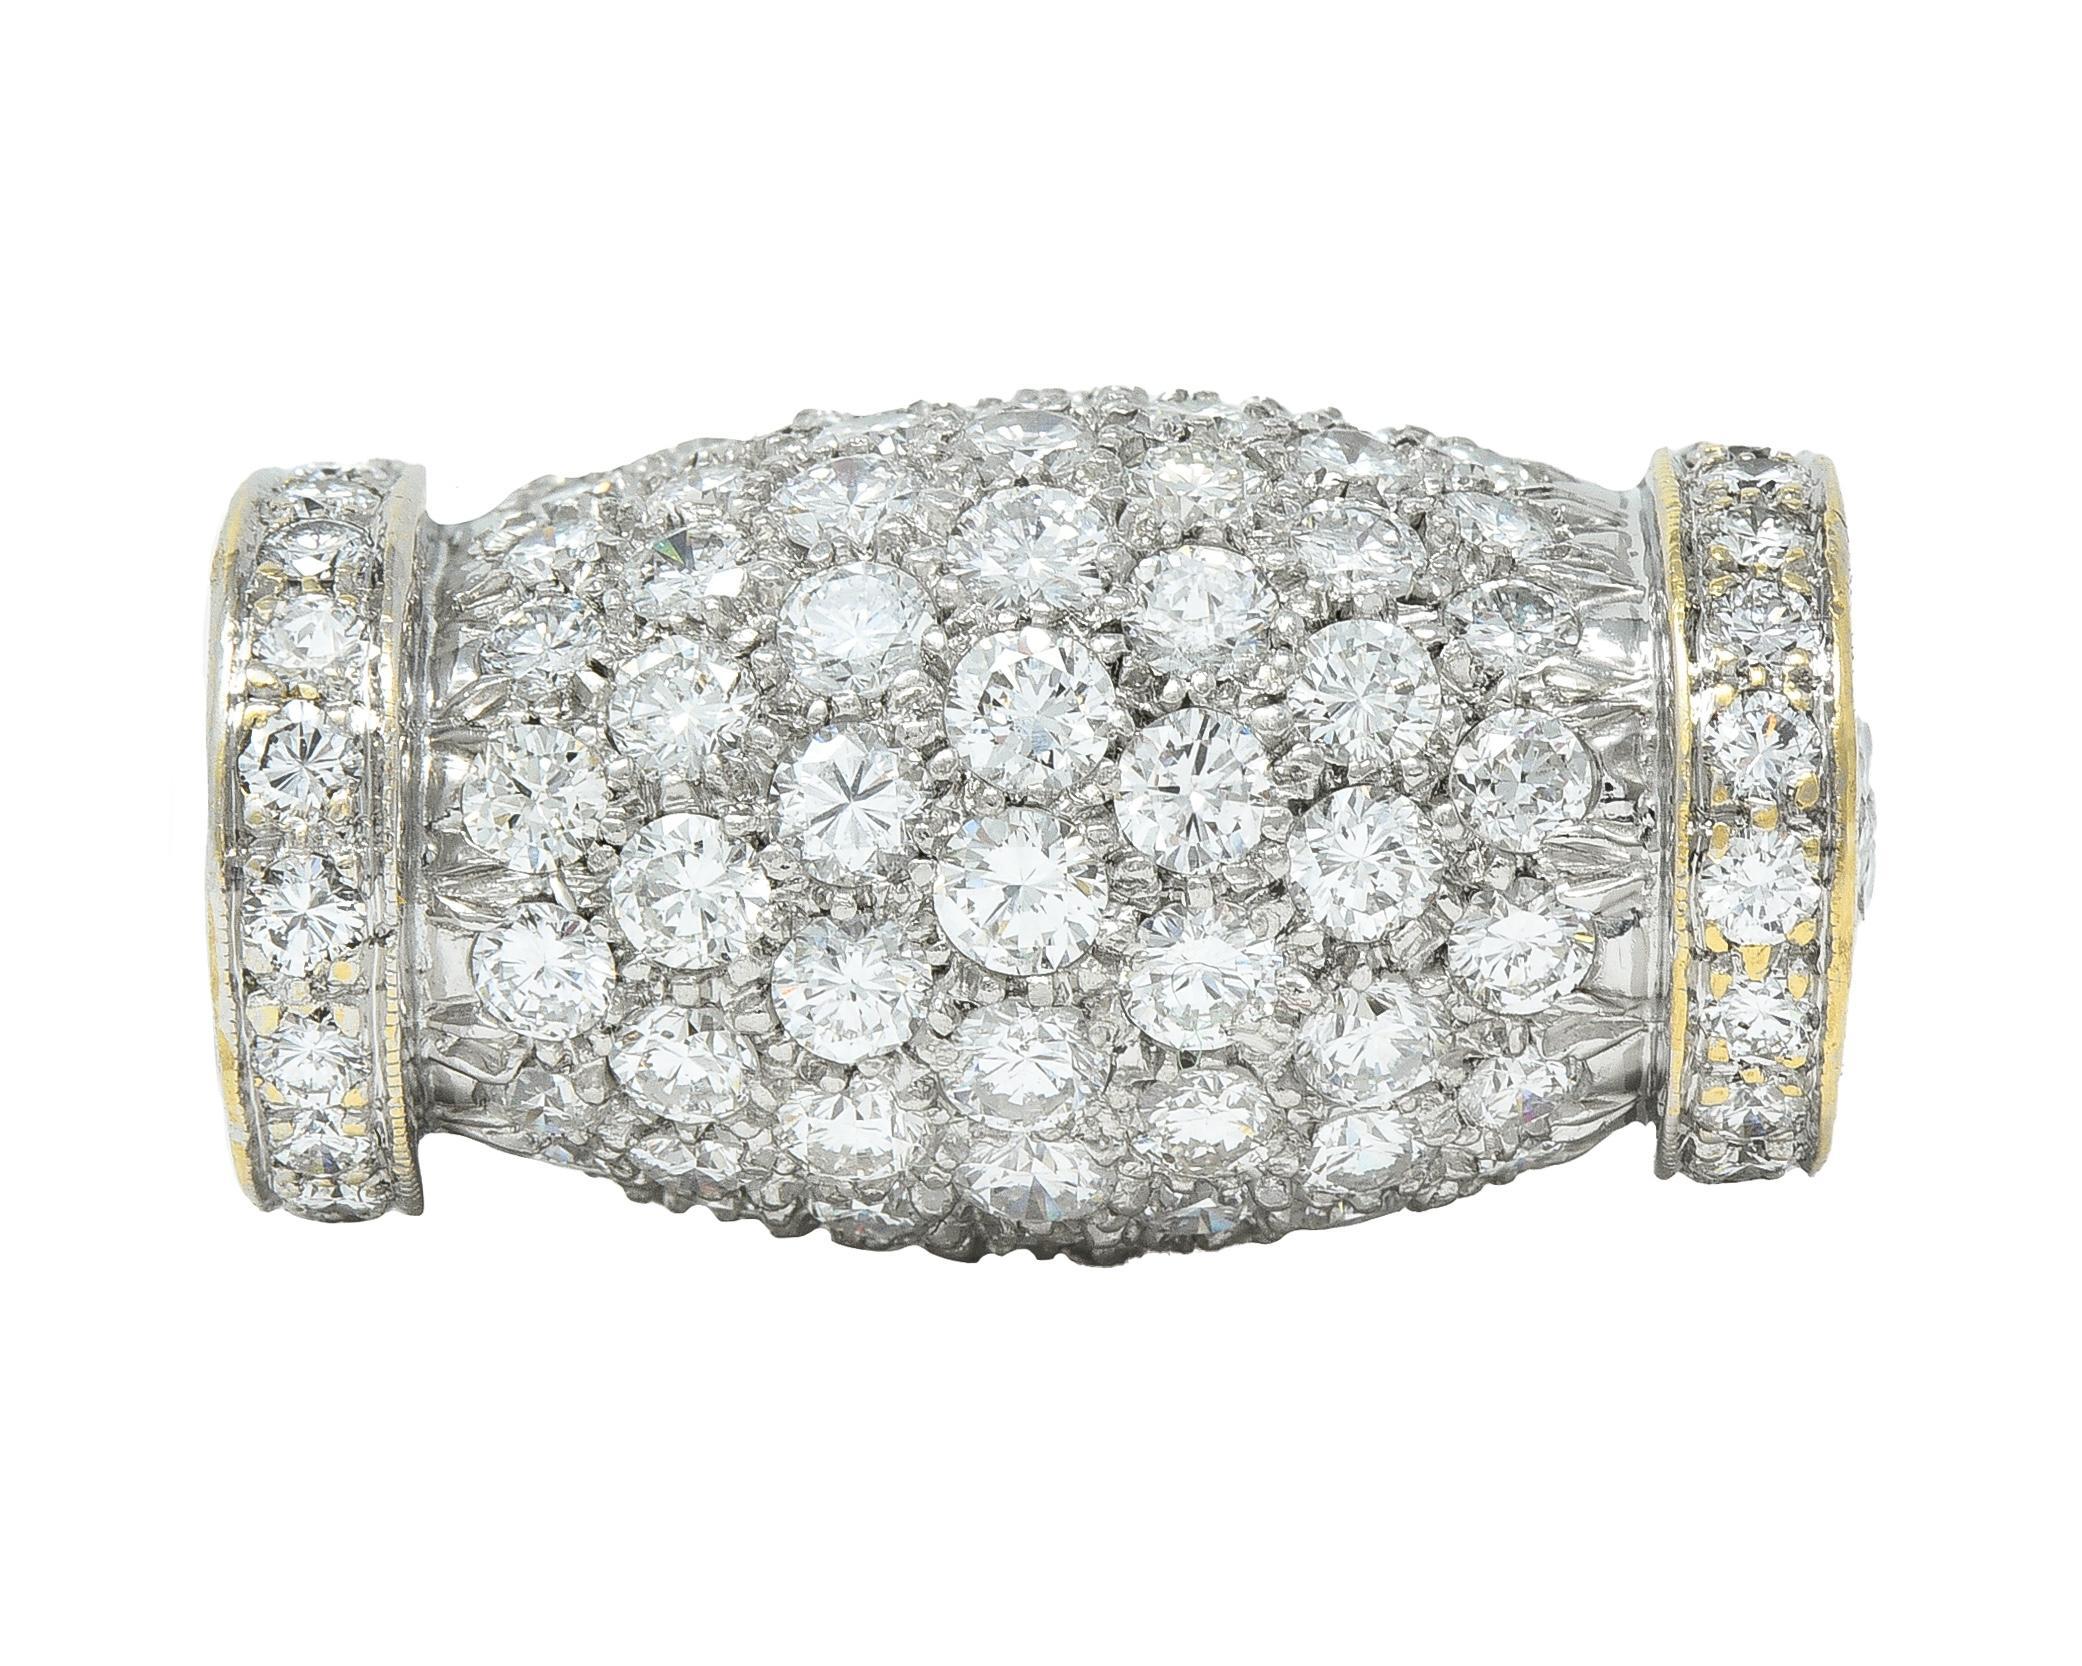 Designed as a domed barrel-shaped form with arching shoulders 
Pavé and bead set throughout with transitional cut diamonds 
Weighing approximately 4.25 carats total - G/H color with VS2 clarity 
Arched shoulders feature linear texture